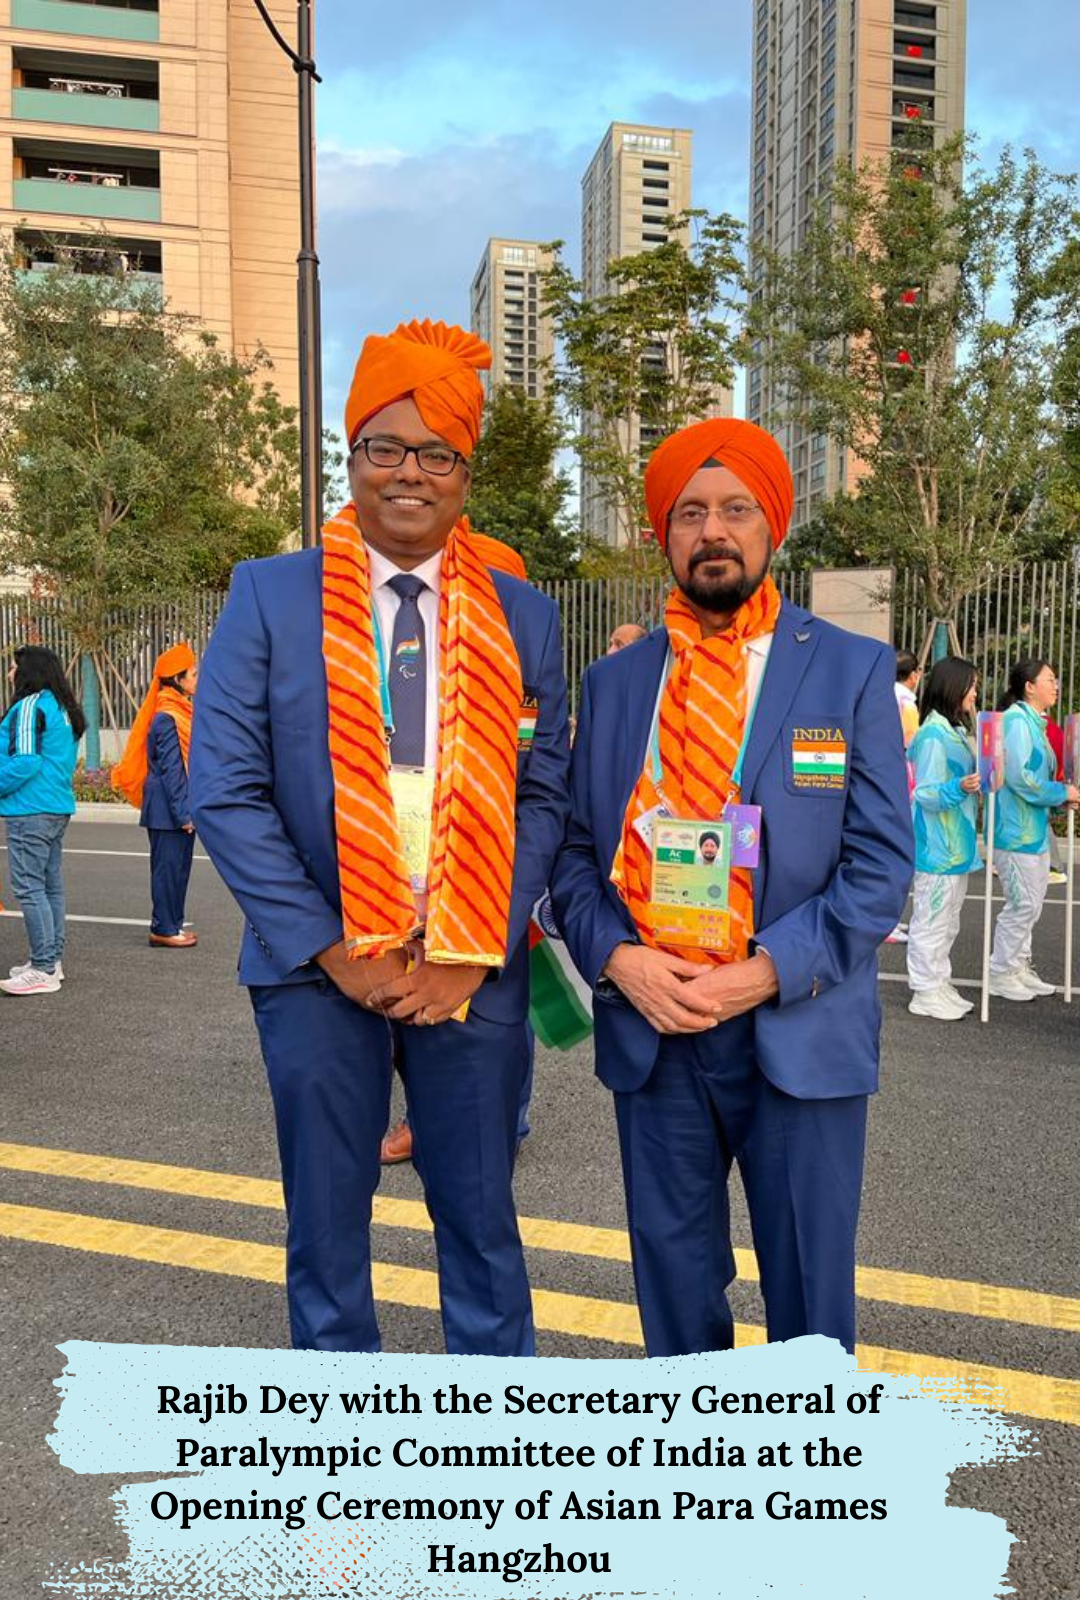 Rajib Dey with the Secretary General of Paralympic Committee of India at the Opening Ceremony of Asian Para Games Hangzhou